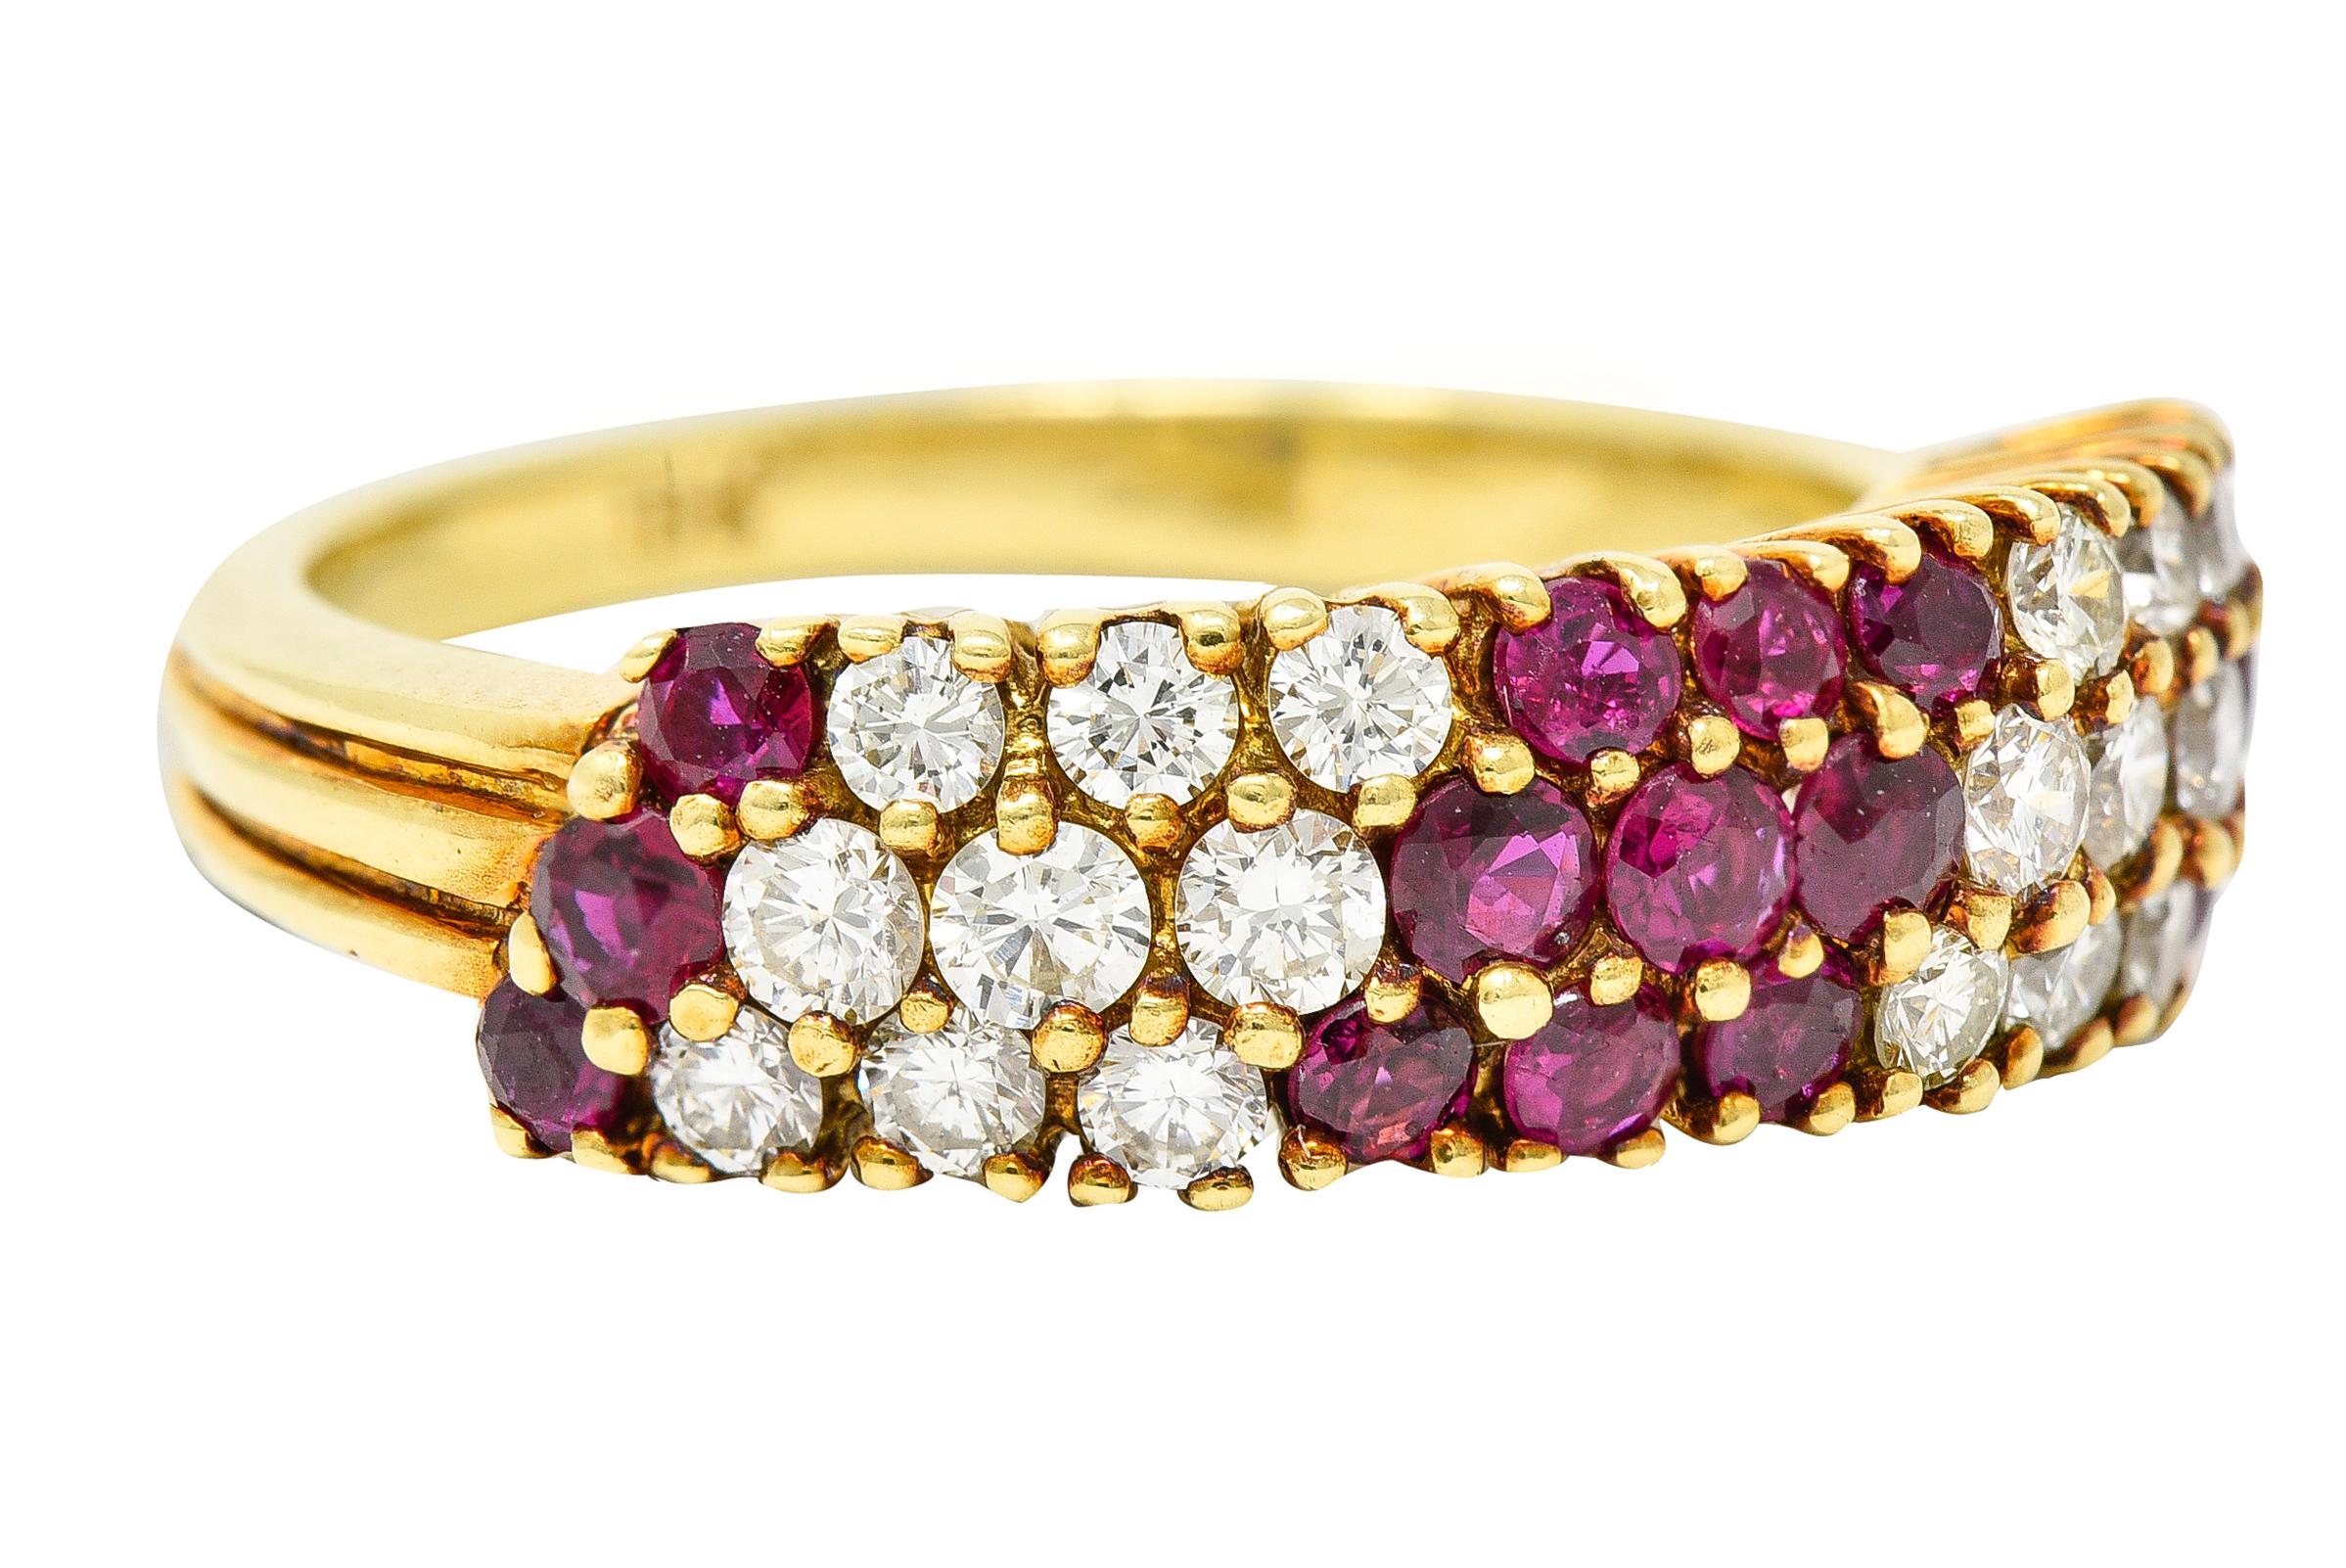 Ring is designed as three rows of prong set round brilliant cut diamonds. Weighing approximately 0.60 carat total - I in color with VS clarity. Alternating with sections of round cut rubies - transparent purplish red in color. Weighing approximately